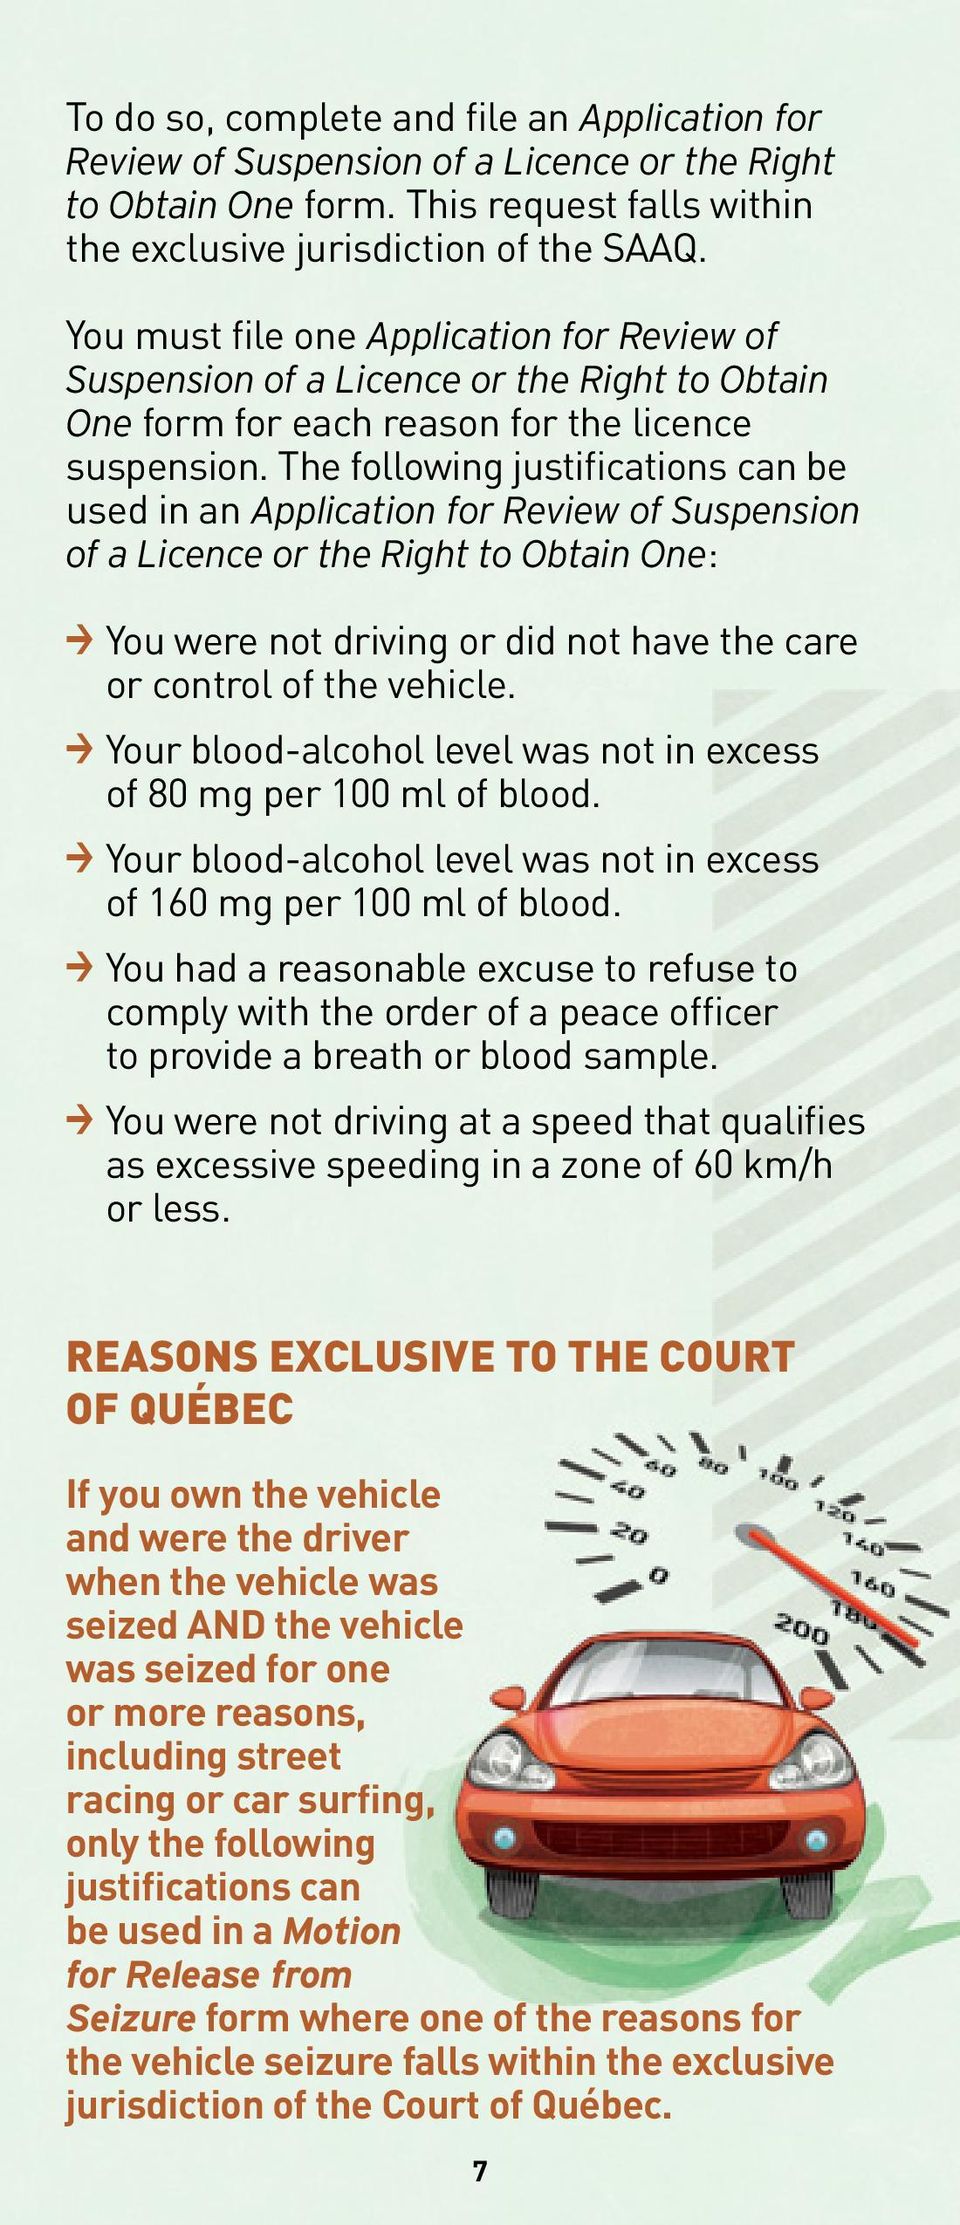 The following justifications can be used in an Application for Review of Suspension of a Licence or the Right to Obtain One: > You were not driving or did not have the care or control of the vehicle.